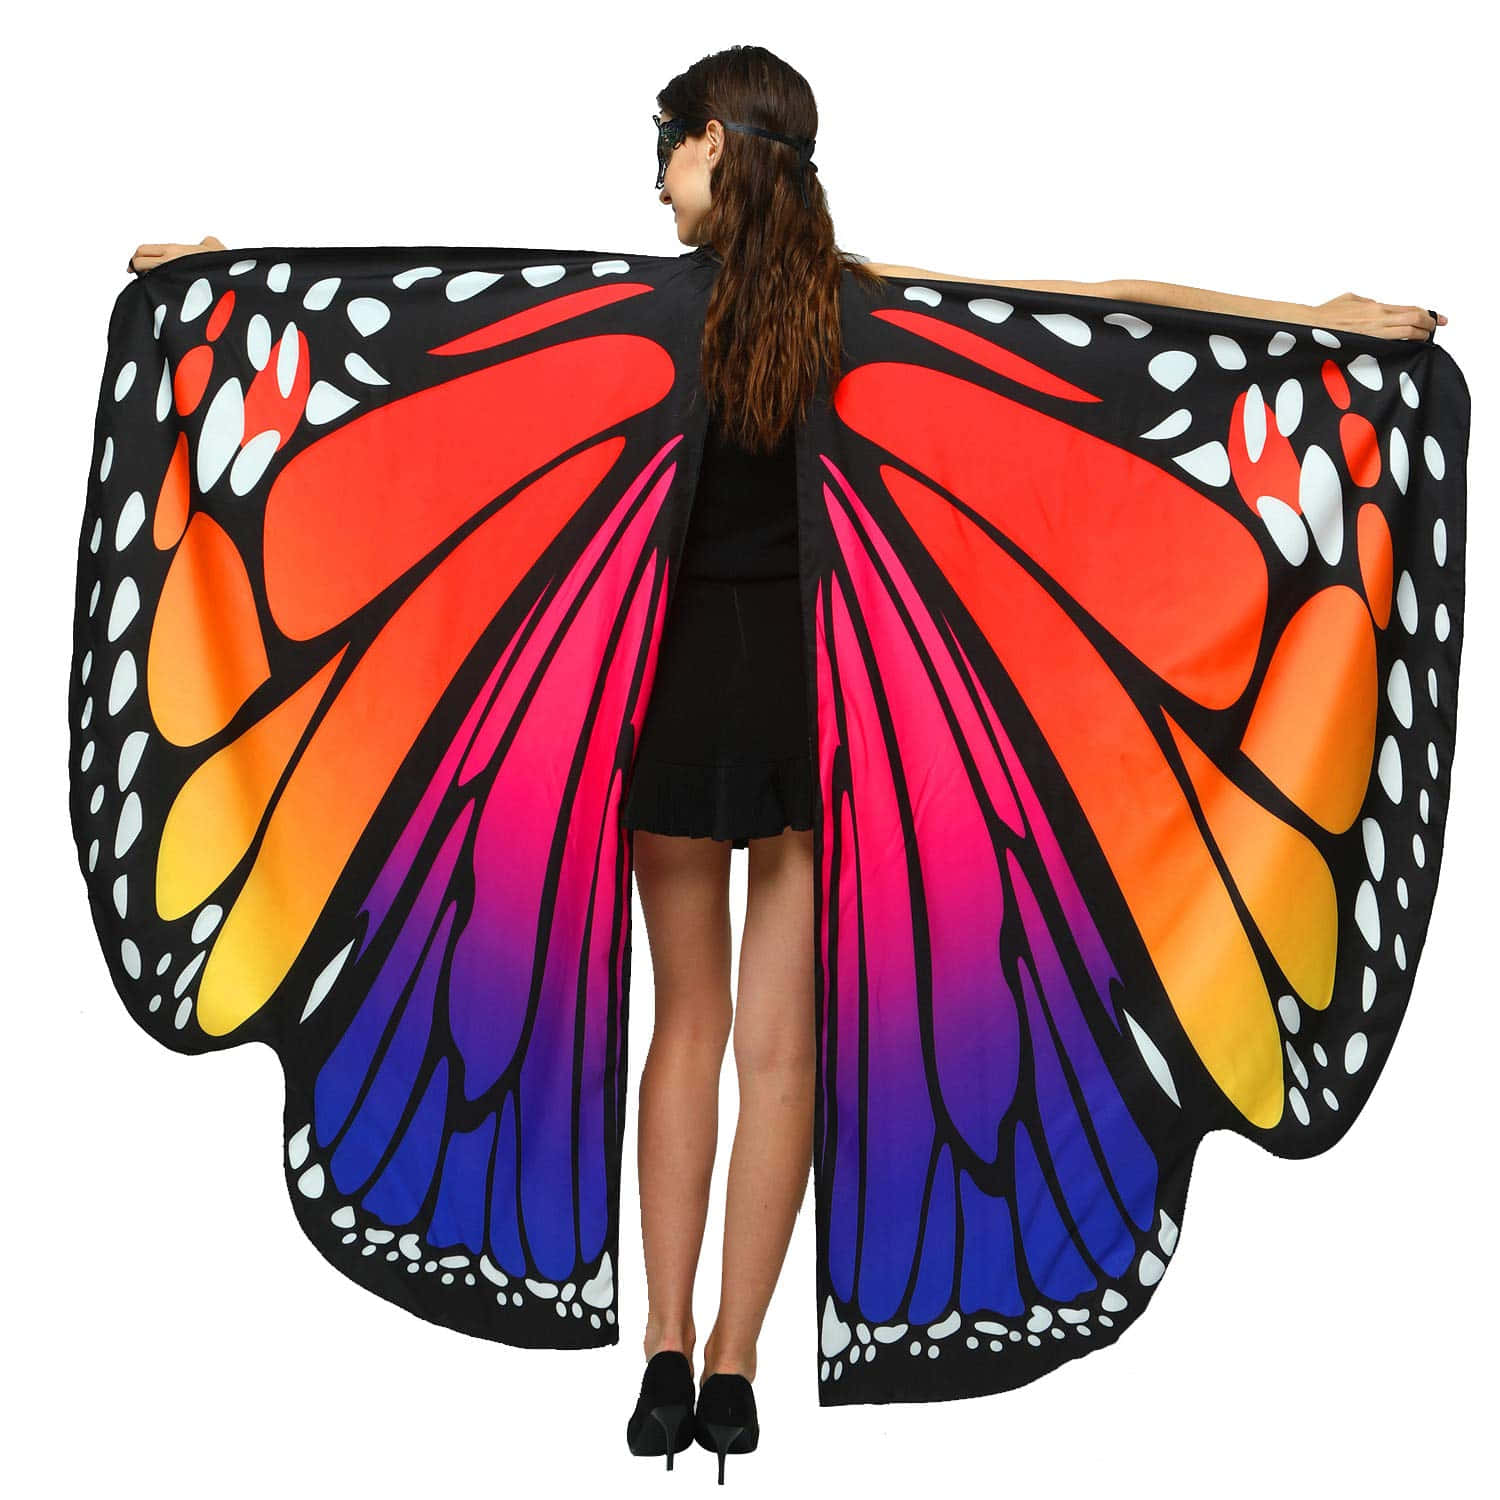 A showstopping look for the evening, this unique dress is made of butterfly wings! Wallpaper